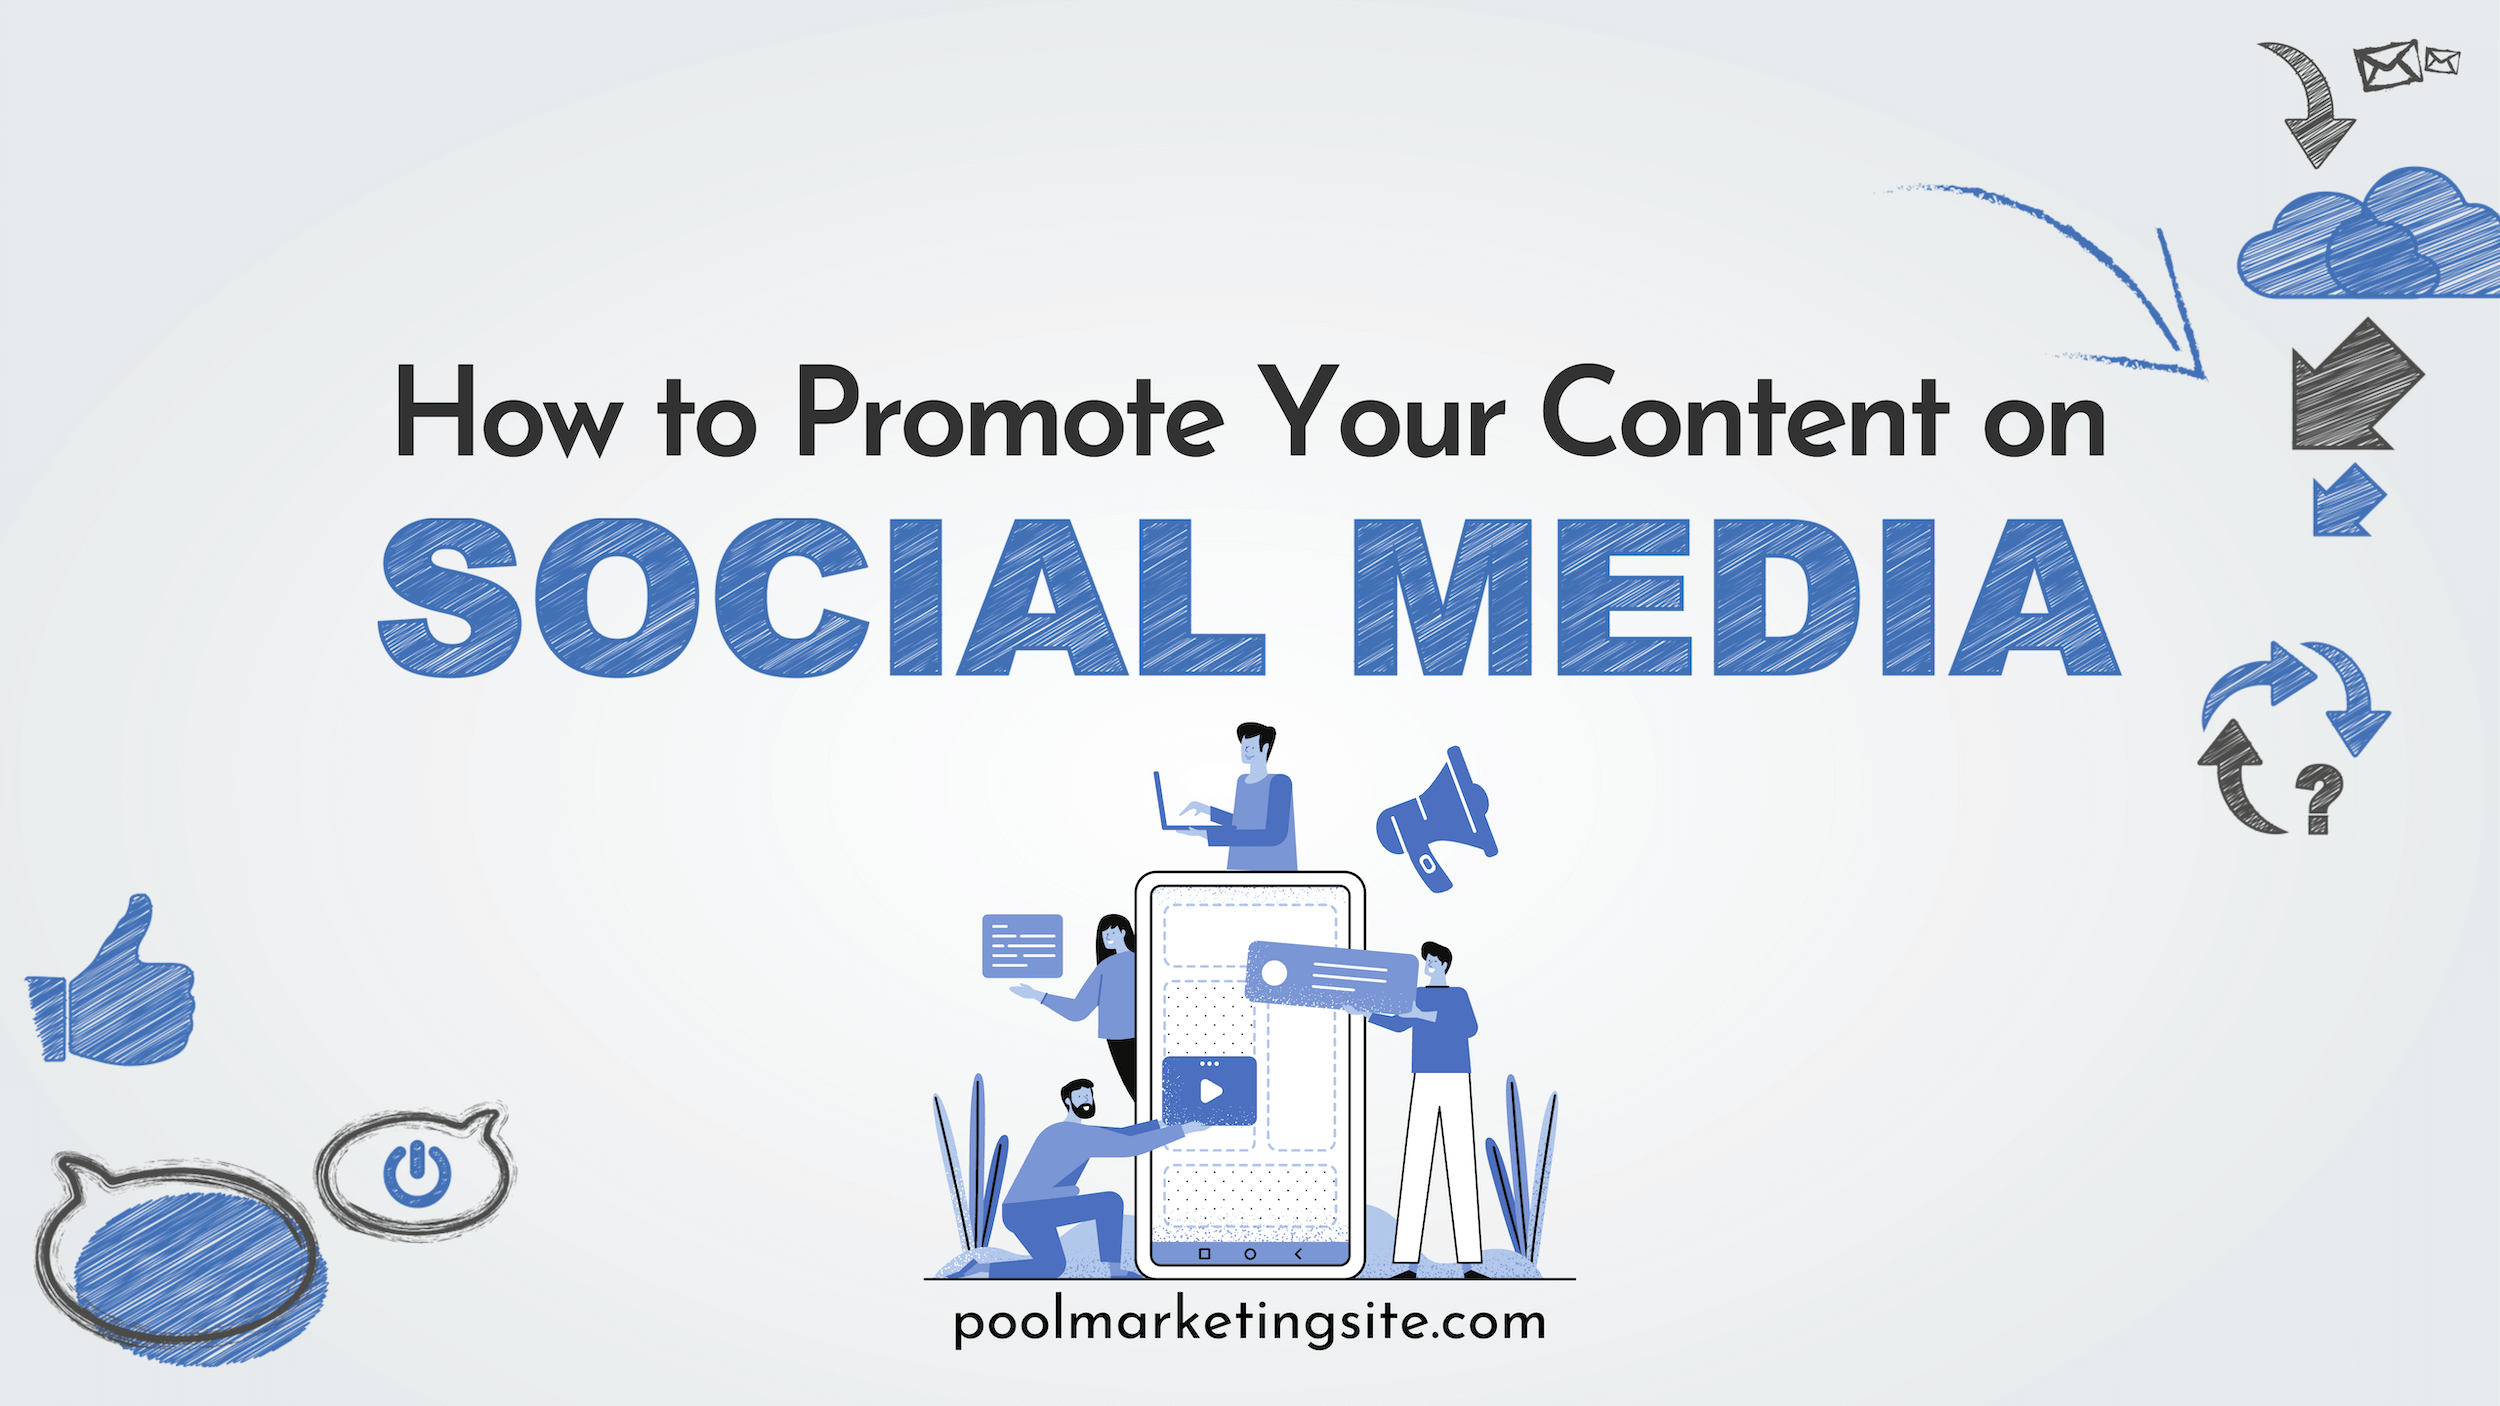 How to Promote Your Content on Social Media